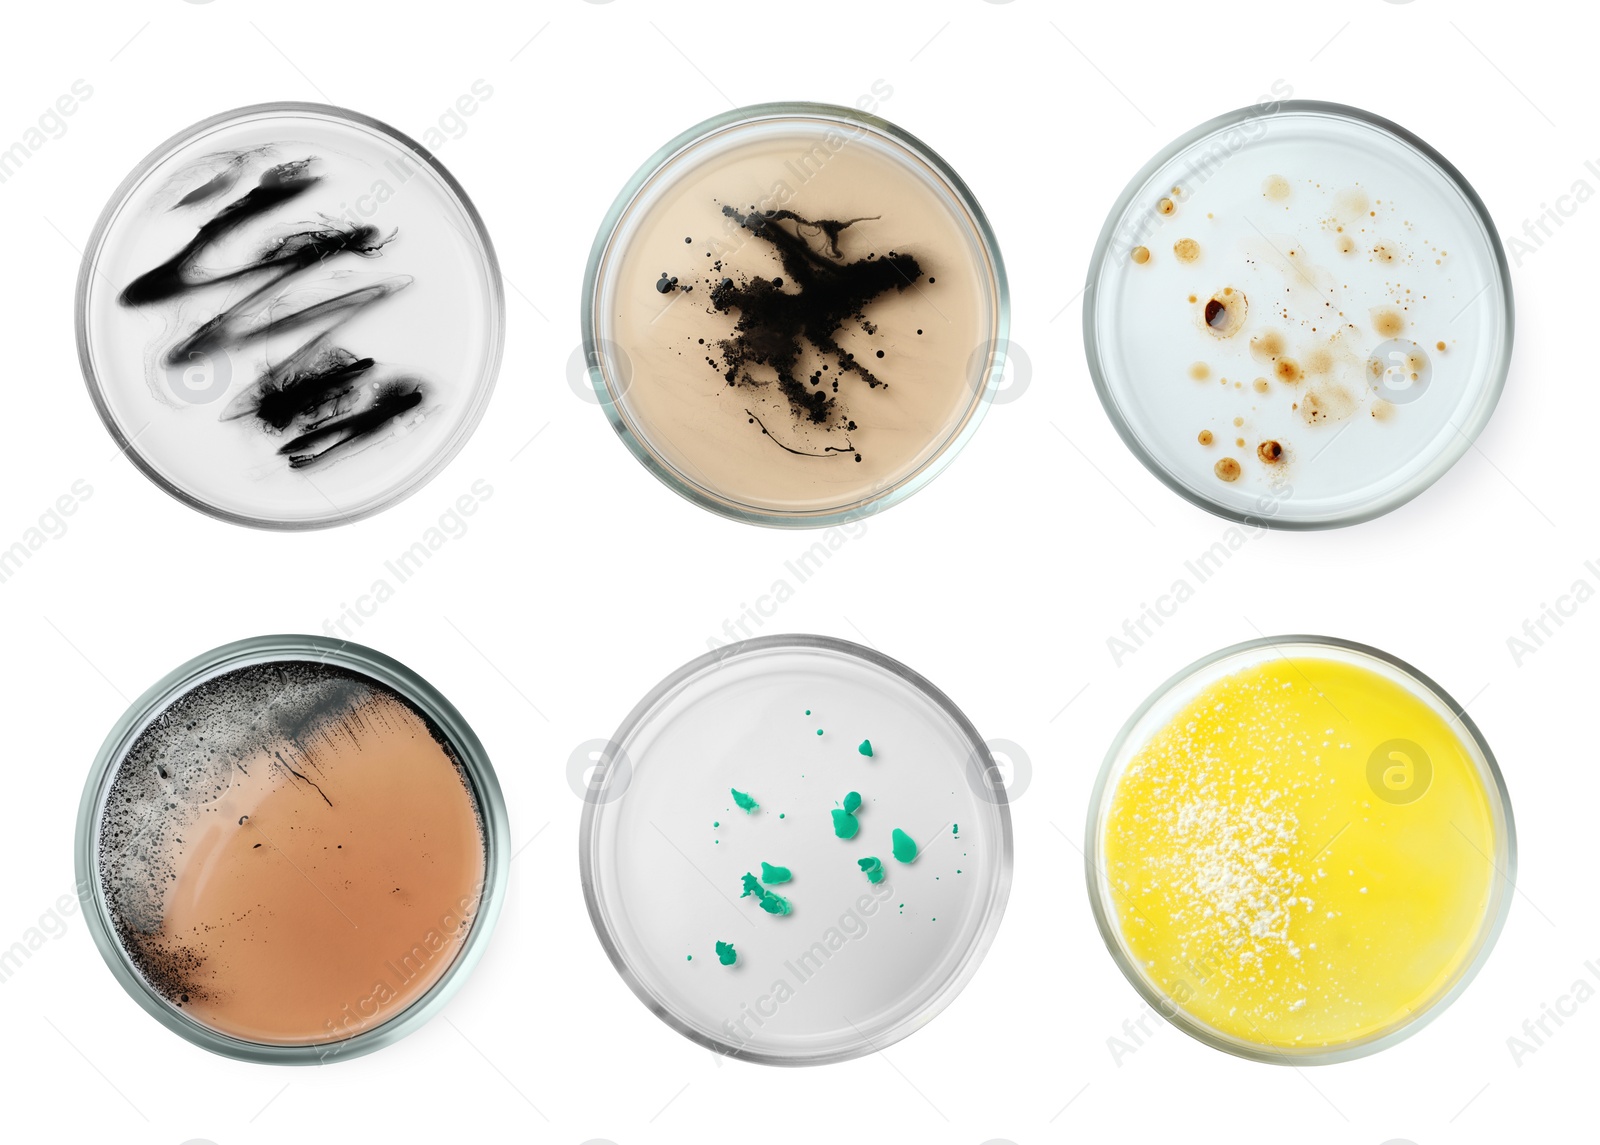 Image of Set of Petri dishes with different culture samples on white background, top view